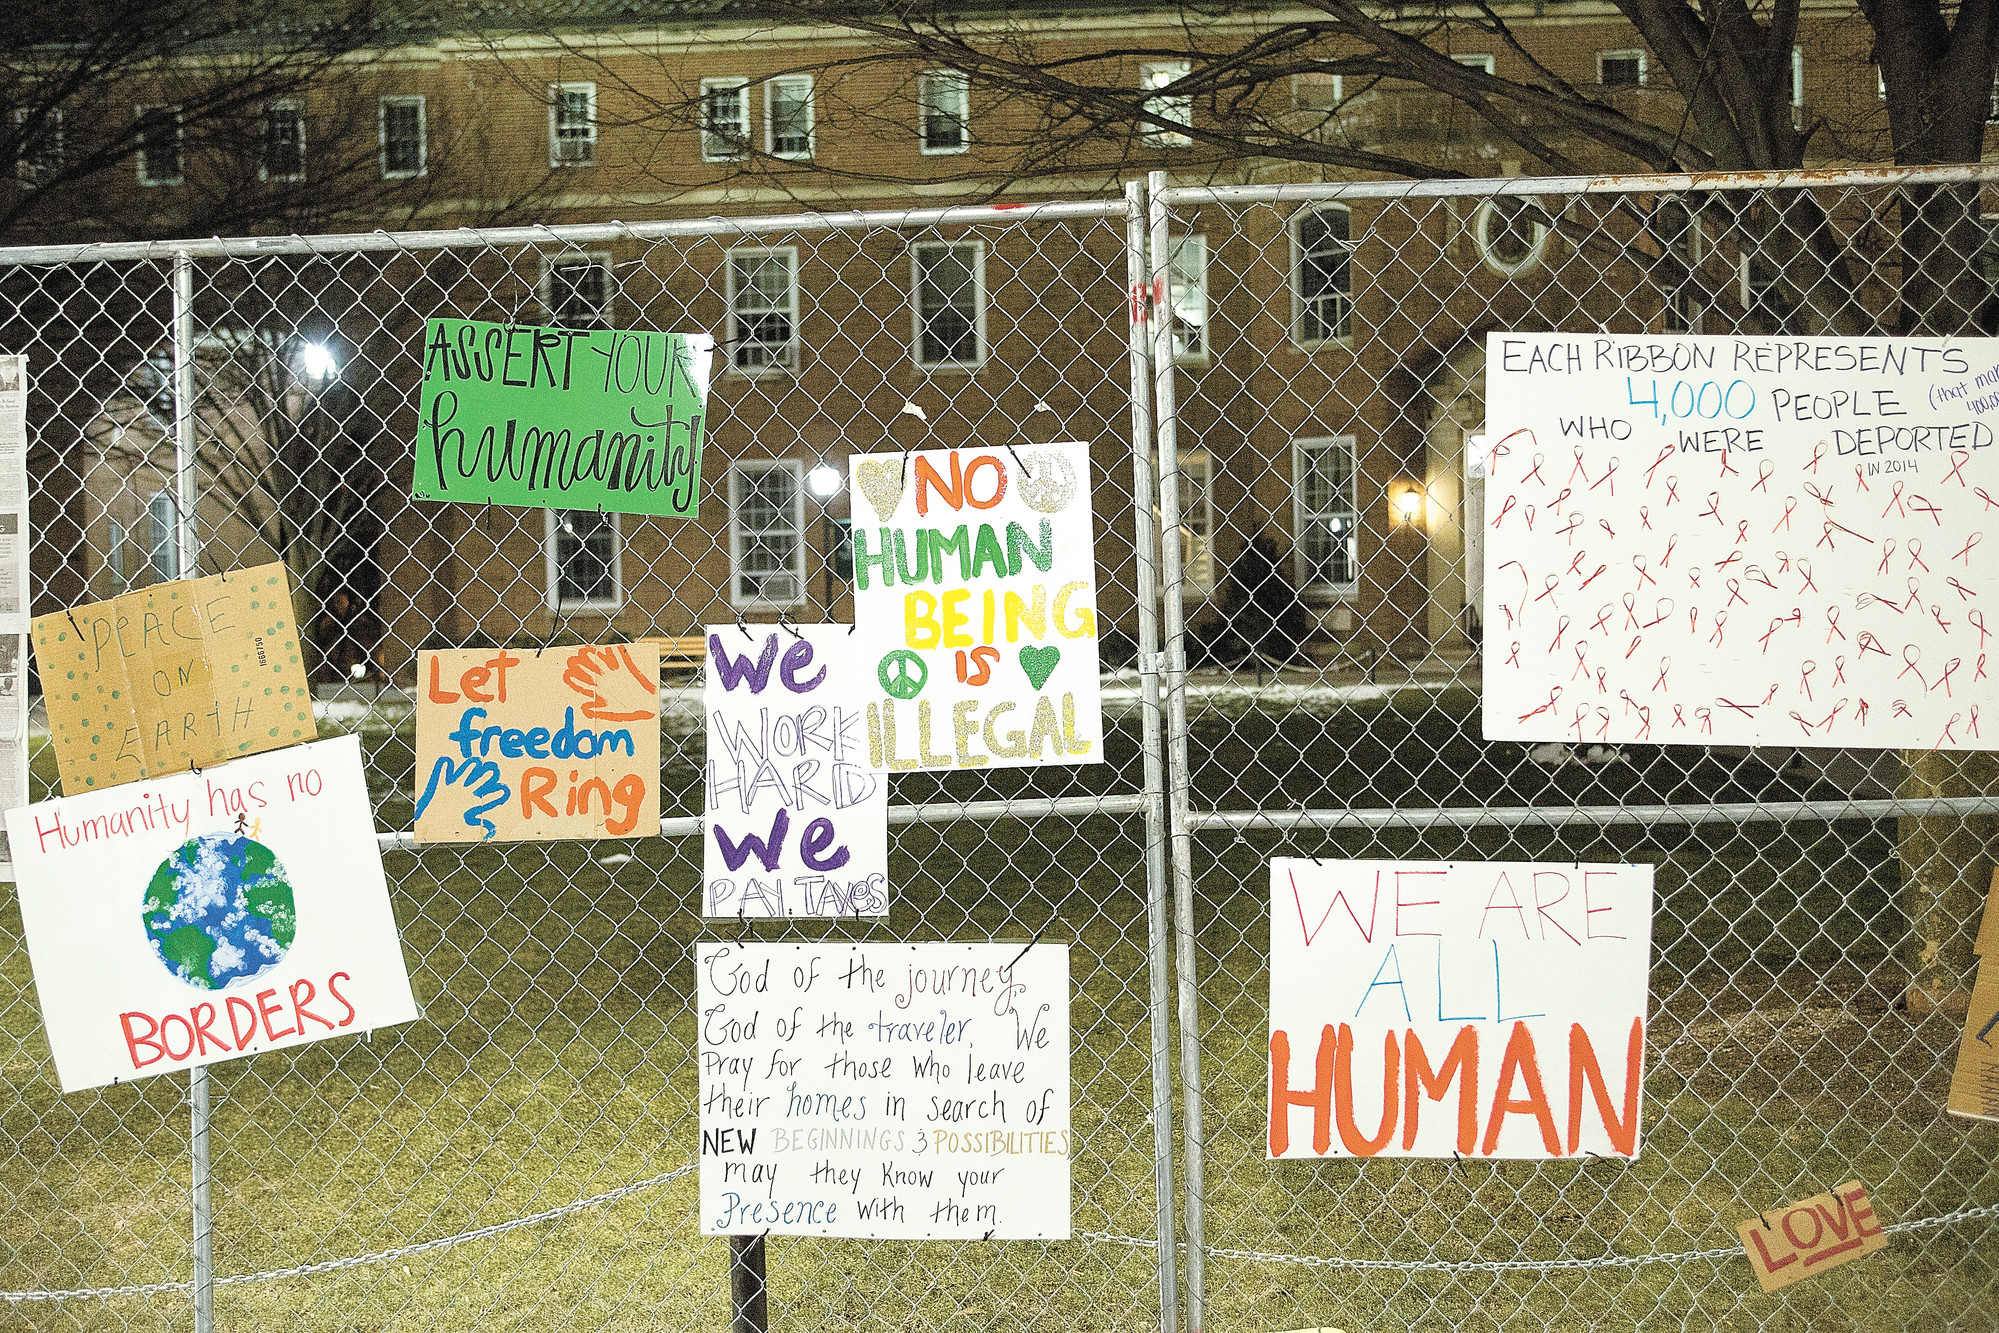 Students erected a mock border on Manhattan College’s quad to draw attention to the pope’s visit to border areas in Mexico.